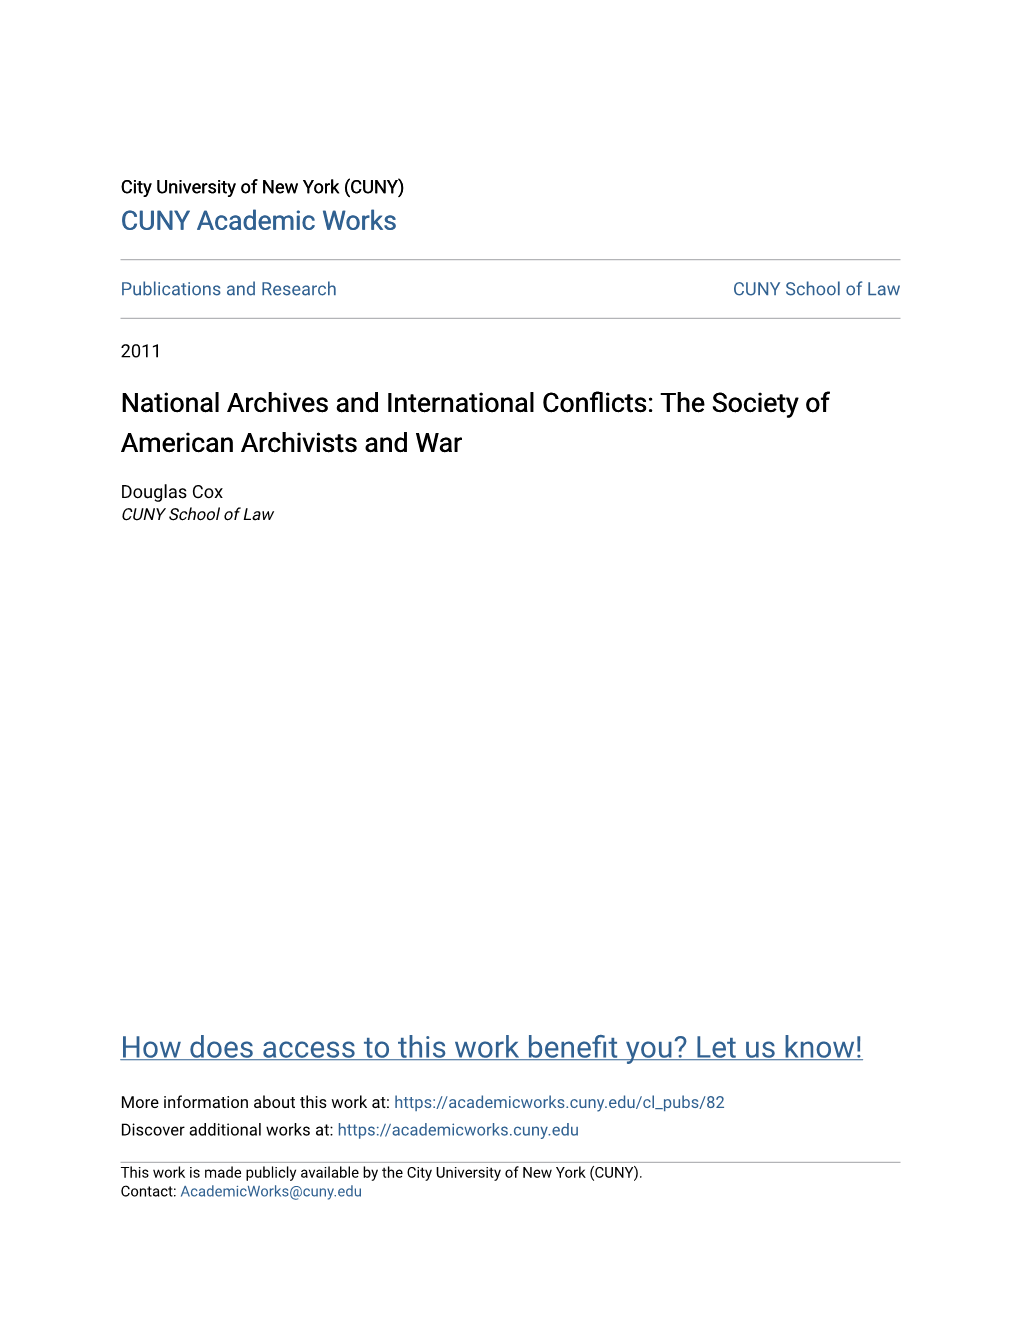 National Archives and International Conflicts: the Society of American Archivists and War